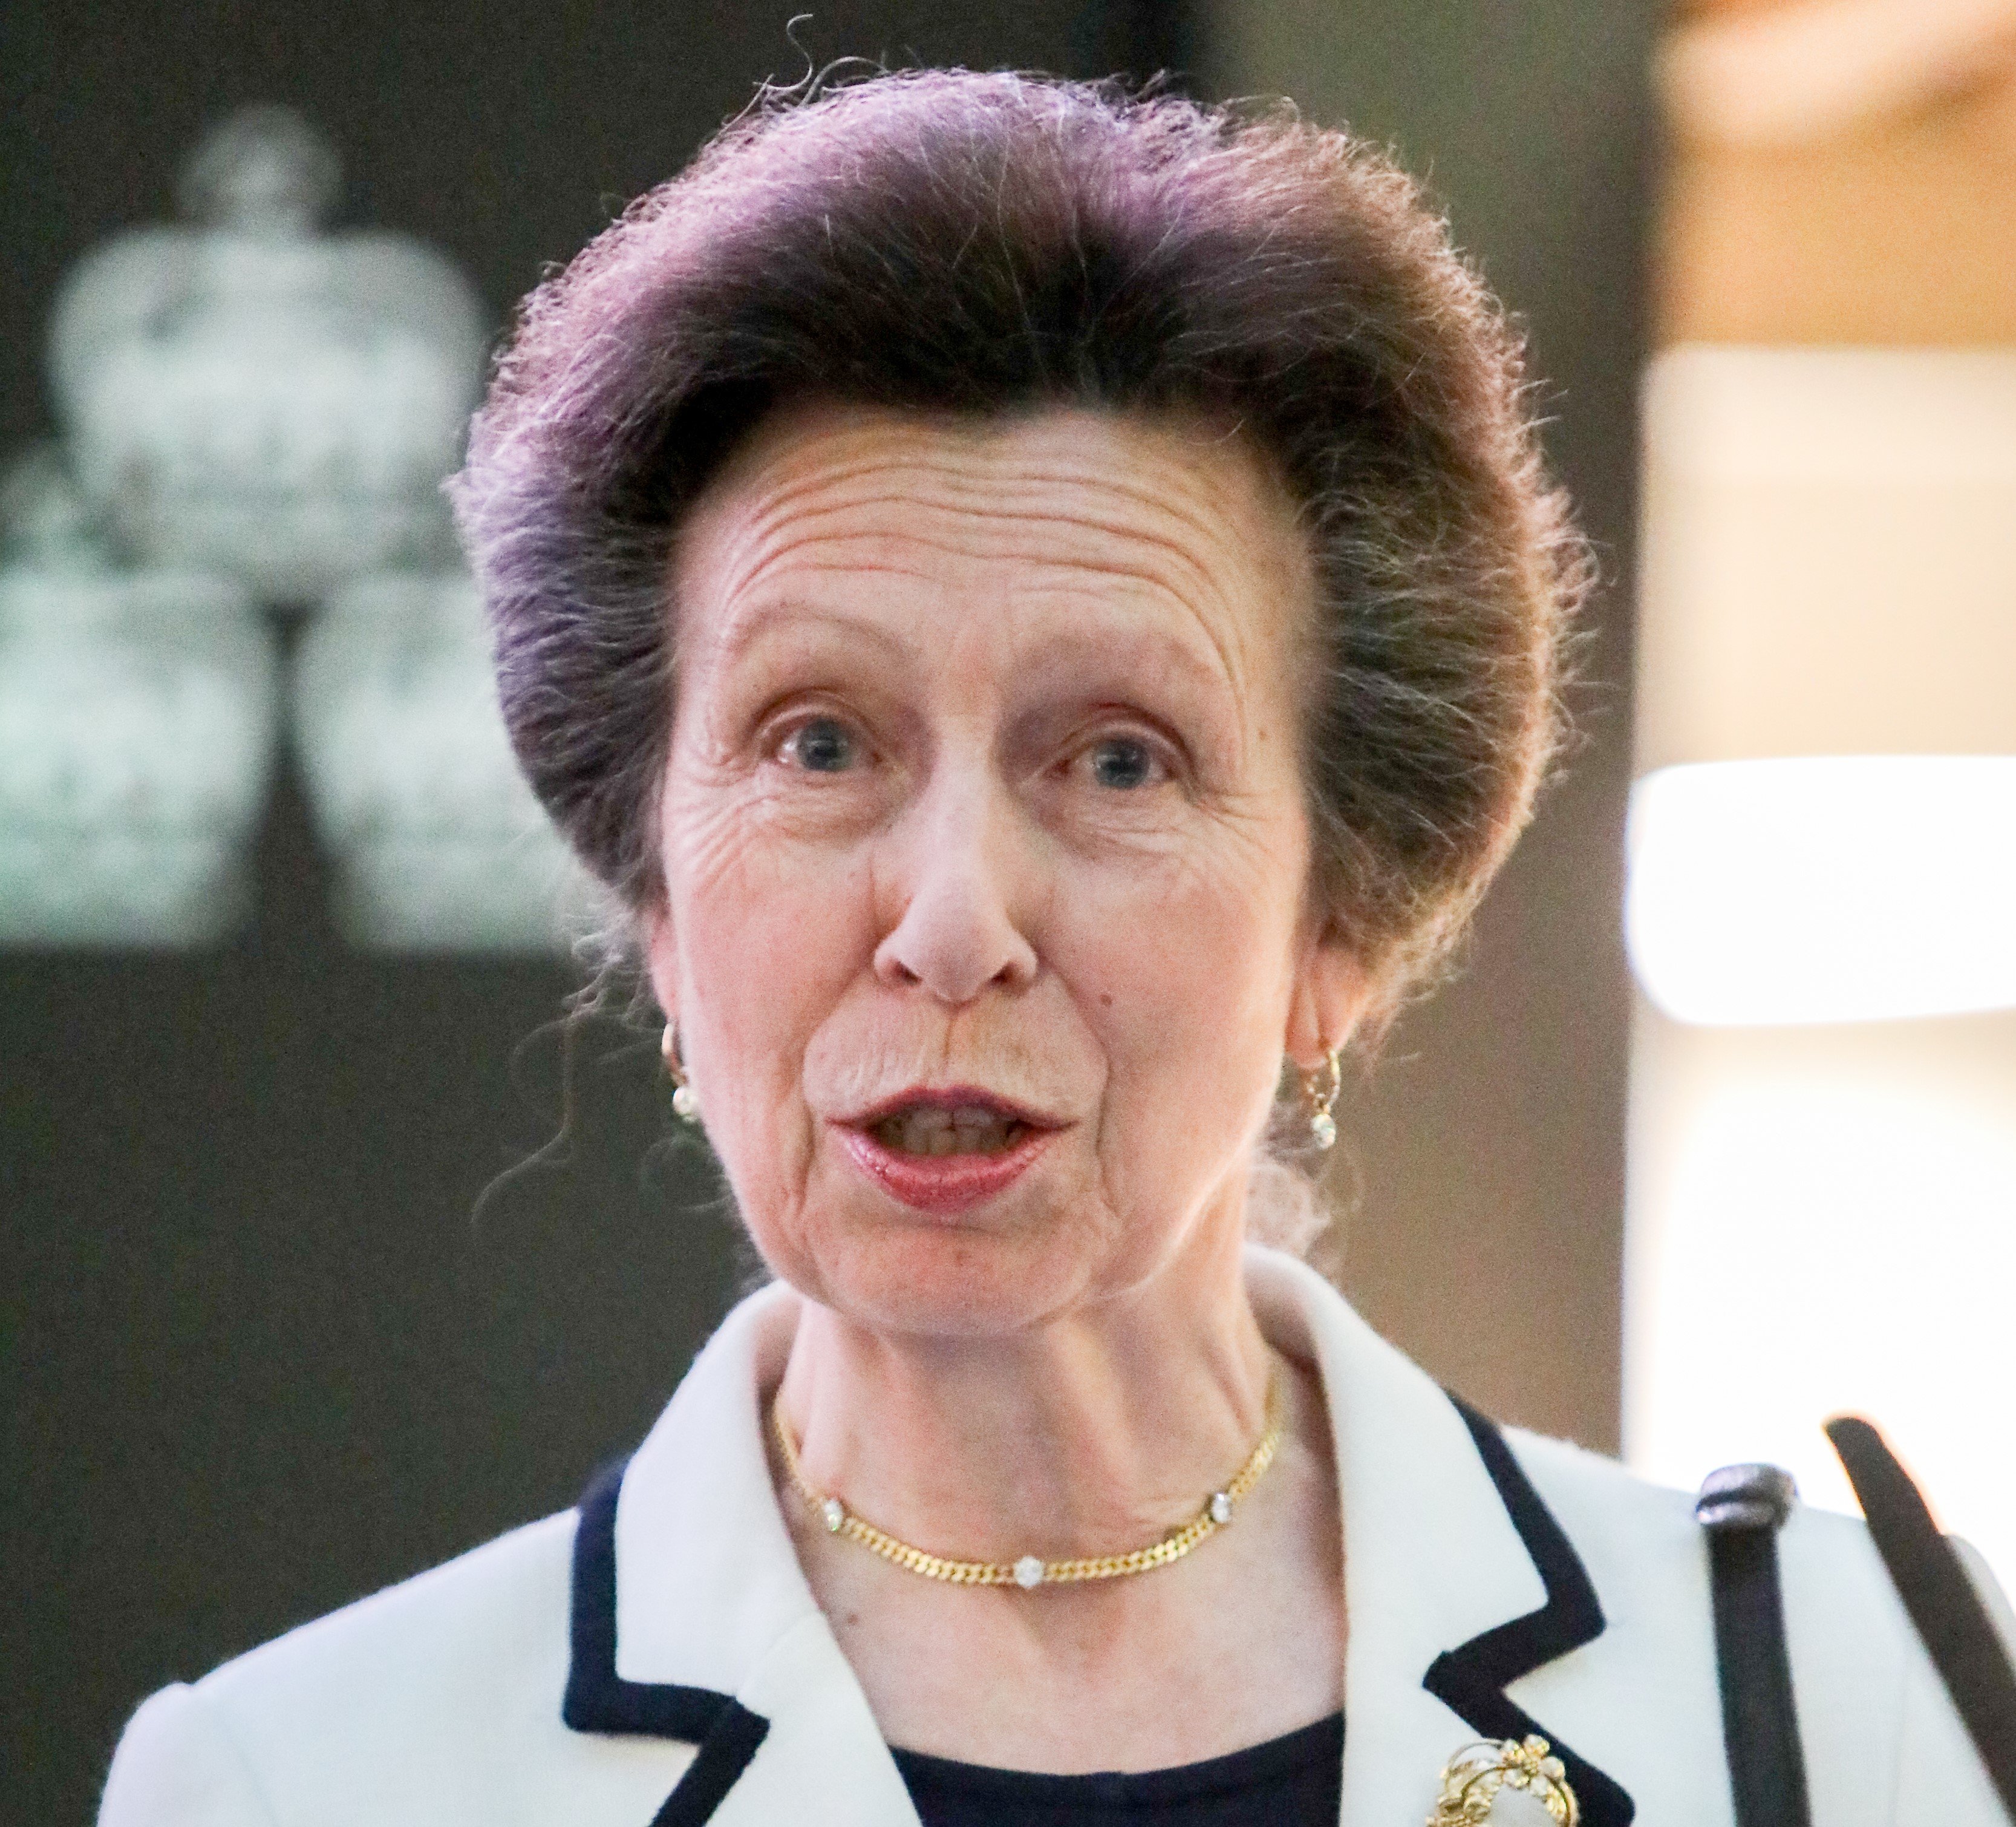 Princess Anne’s Insulting Jab ‘Most Stupid Person’ Heard When She Forgot to Turn Her Microphone Off